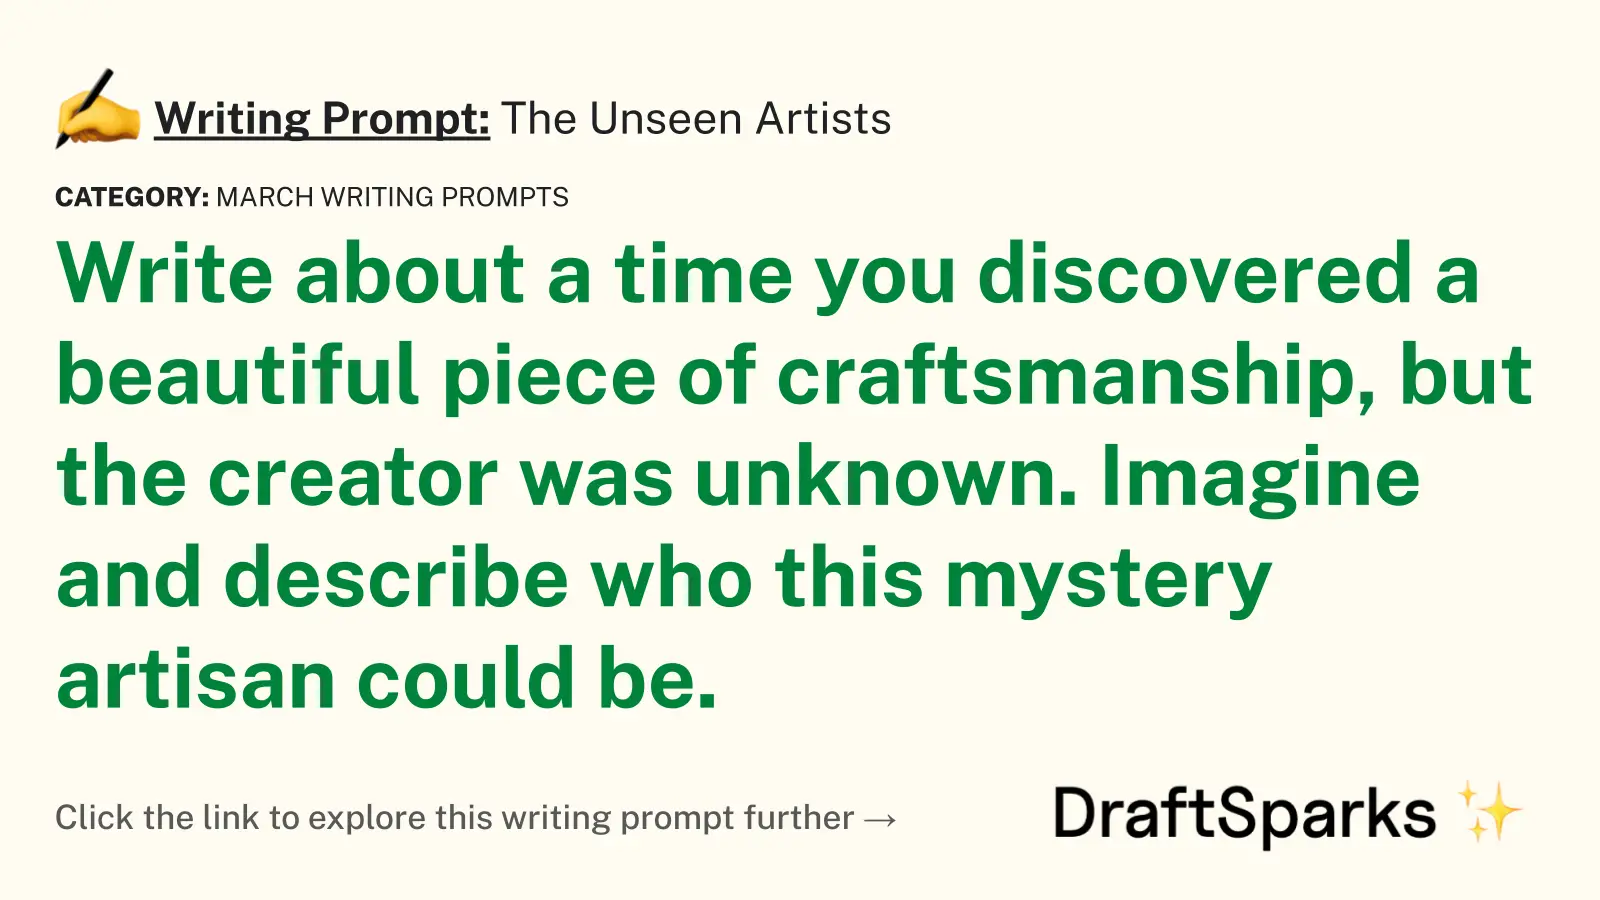 The Unseen Artists